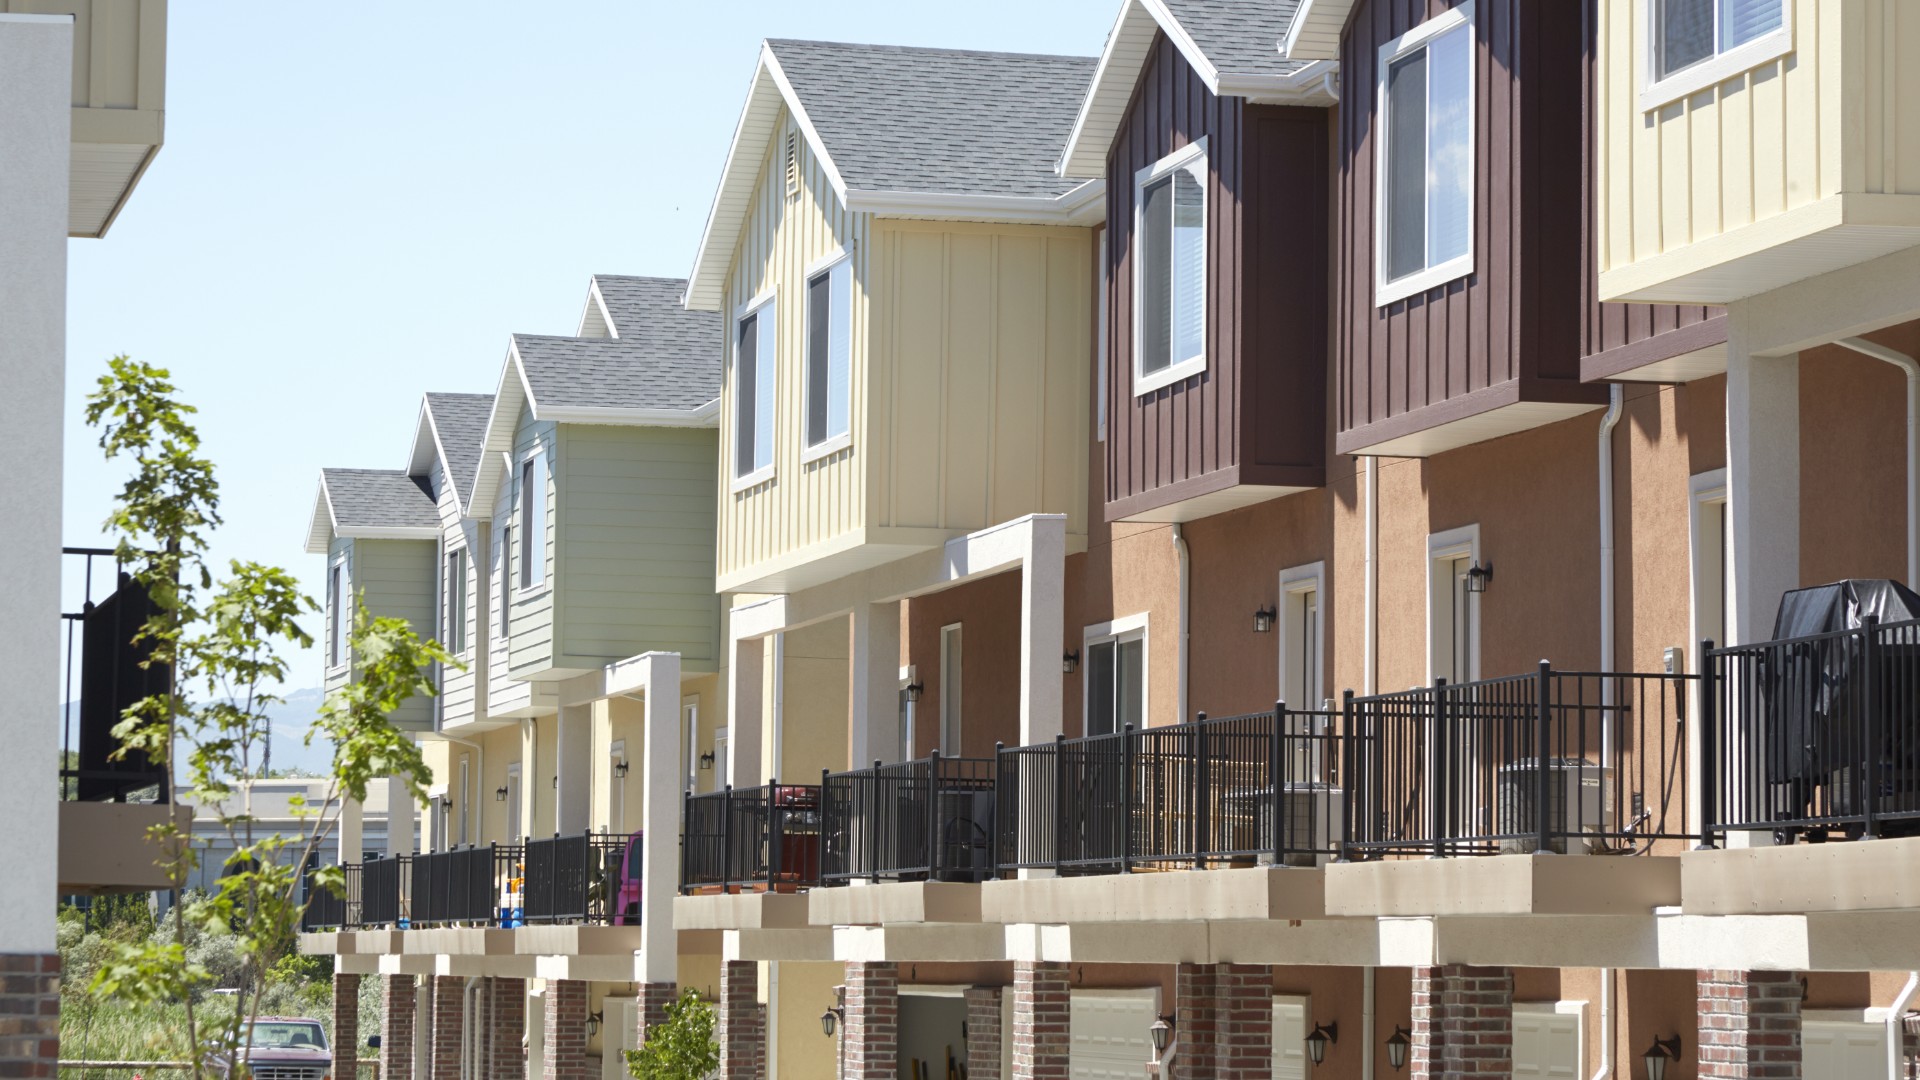 Row of townhouses with modern balcony railings in various colors.